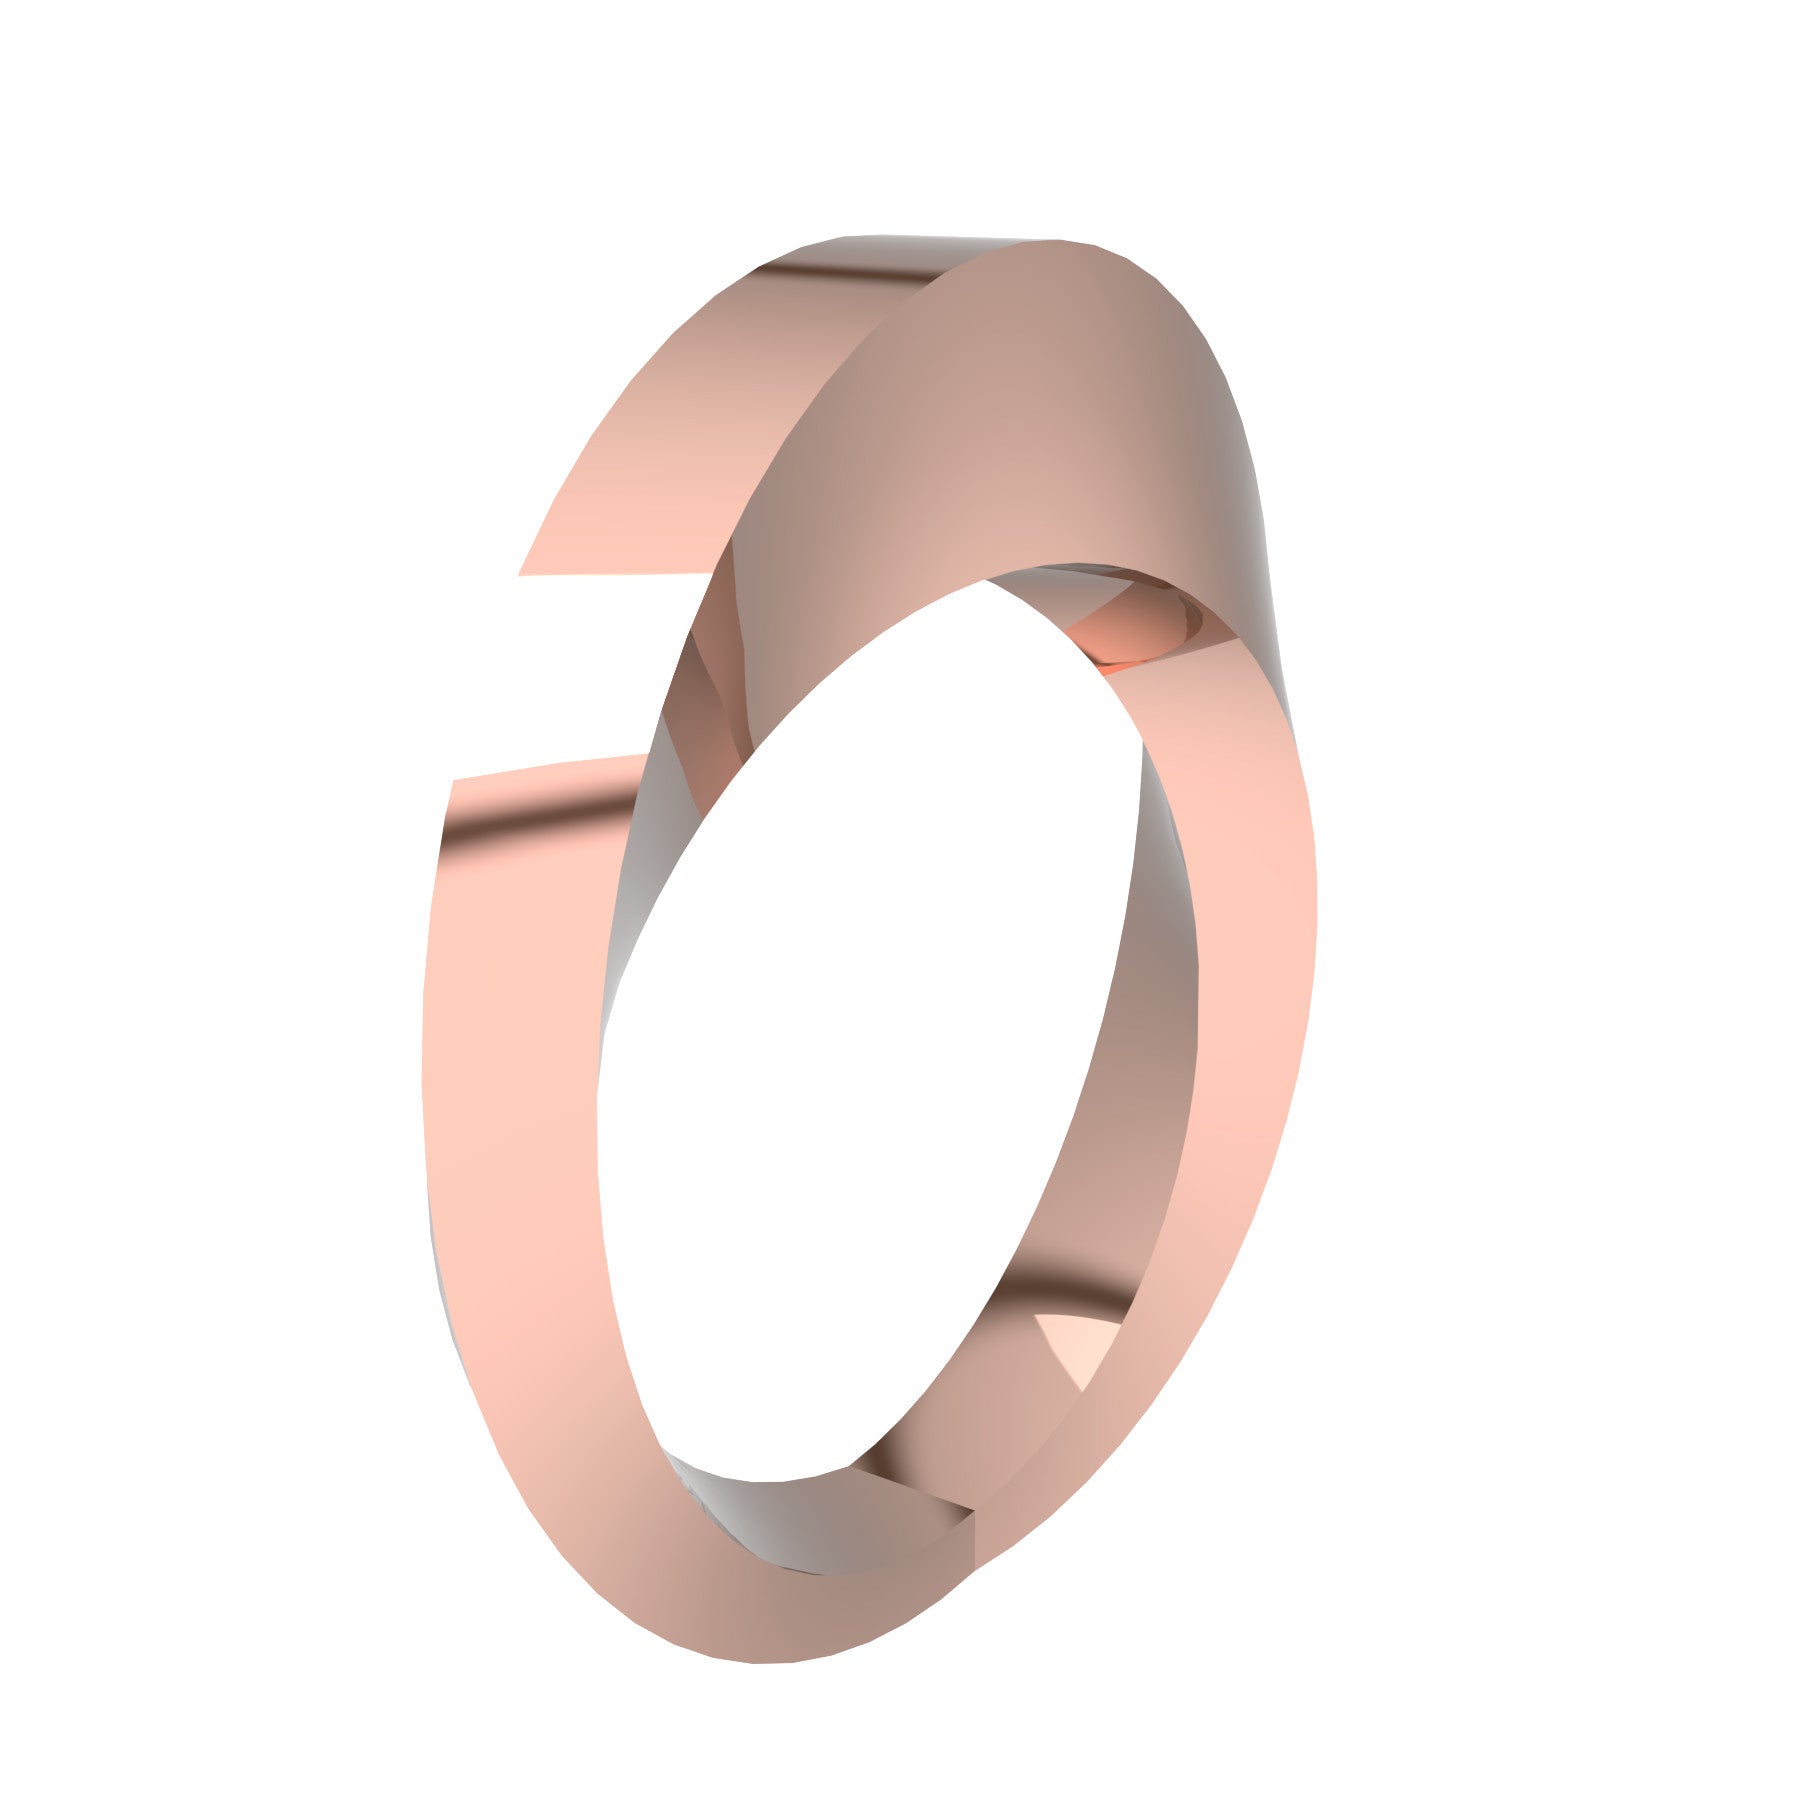 crazy ribbon ring, 18 K pink gold, weight about 11,0 g (0.39 oz) width 3 mm